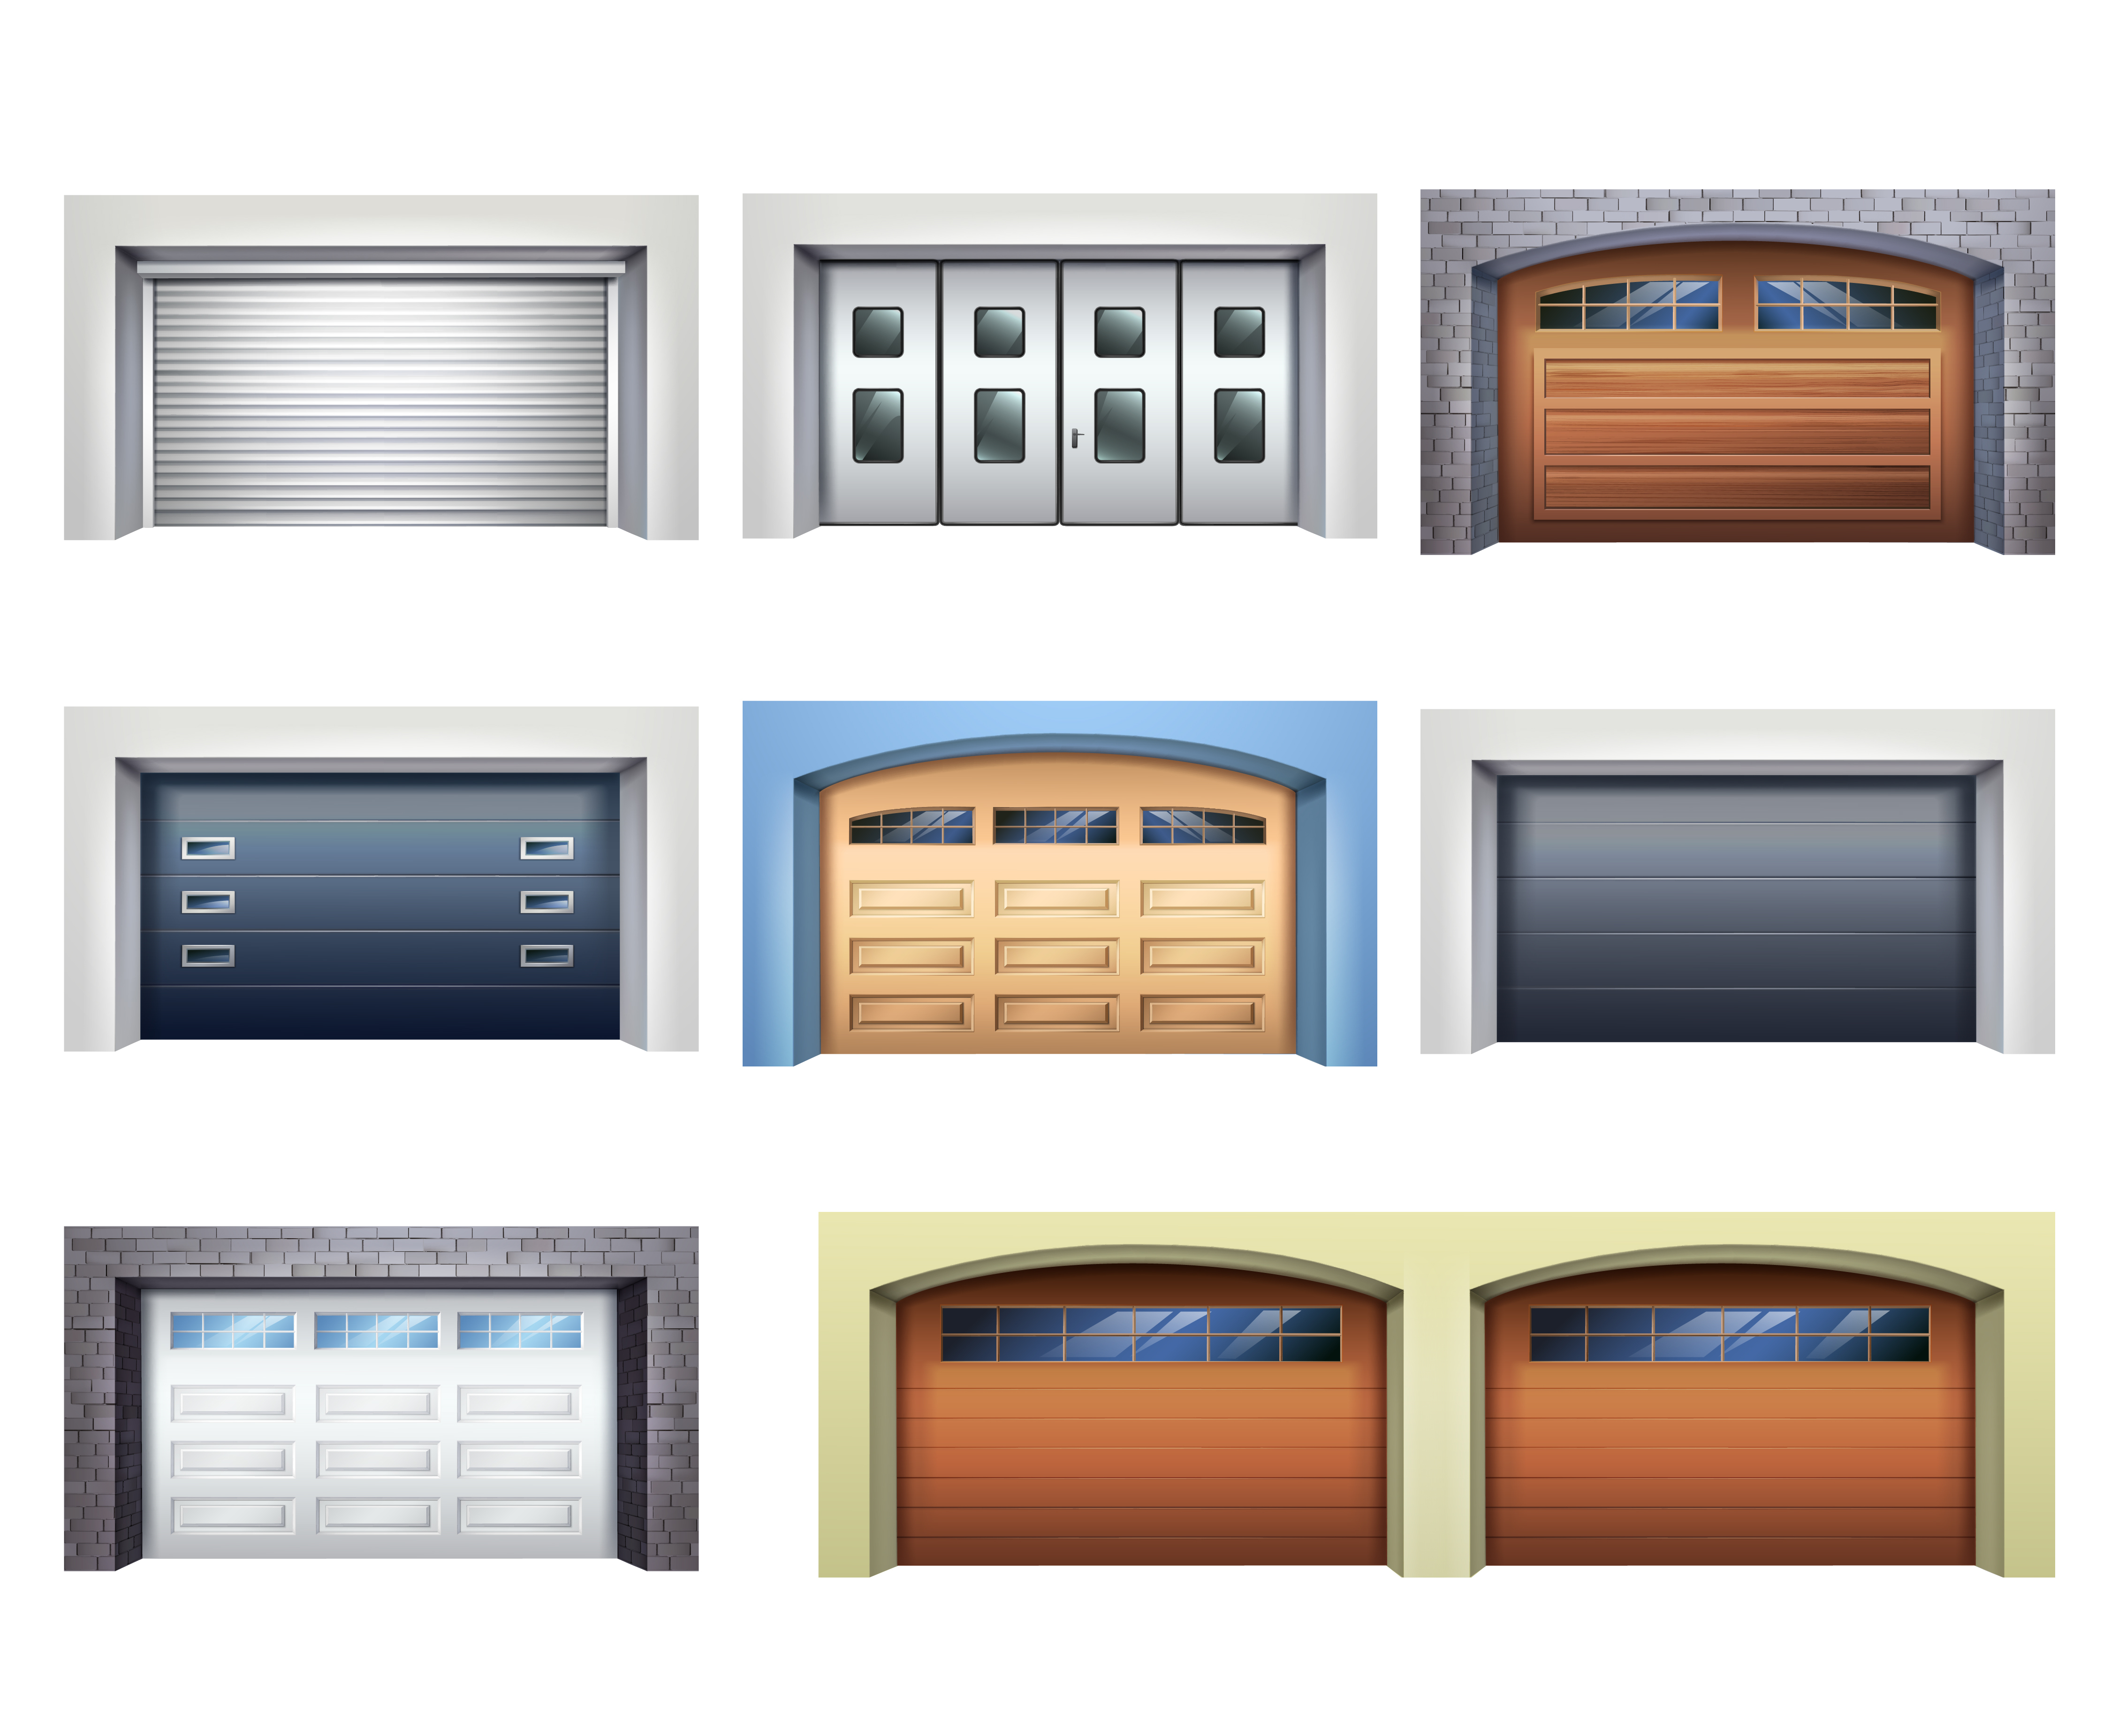 What are the different types of garage door materials?